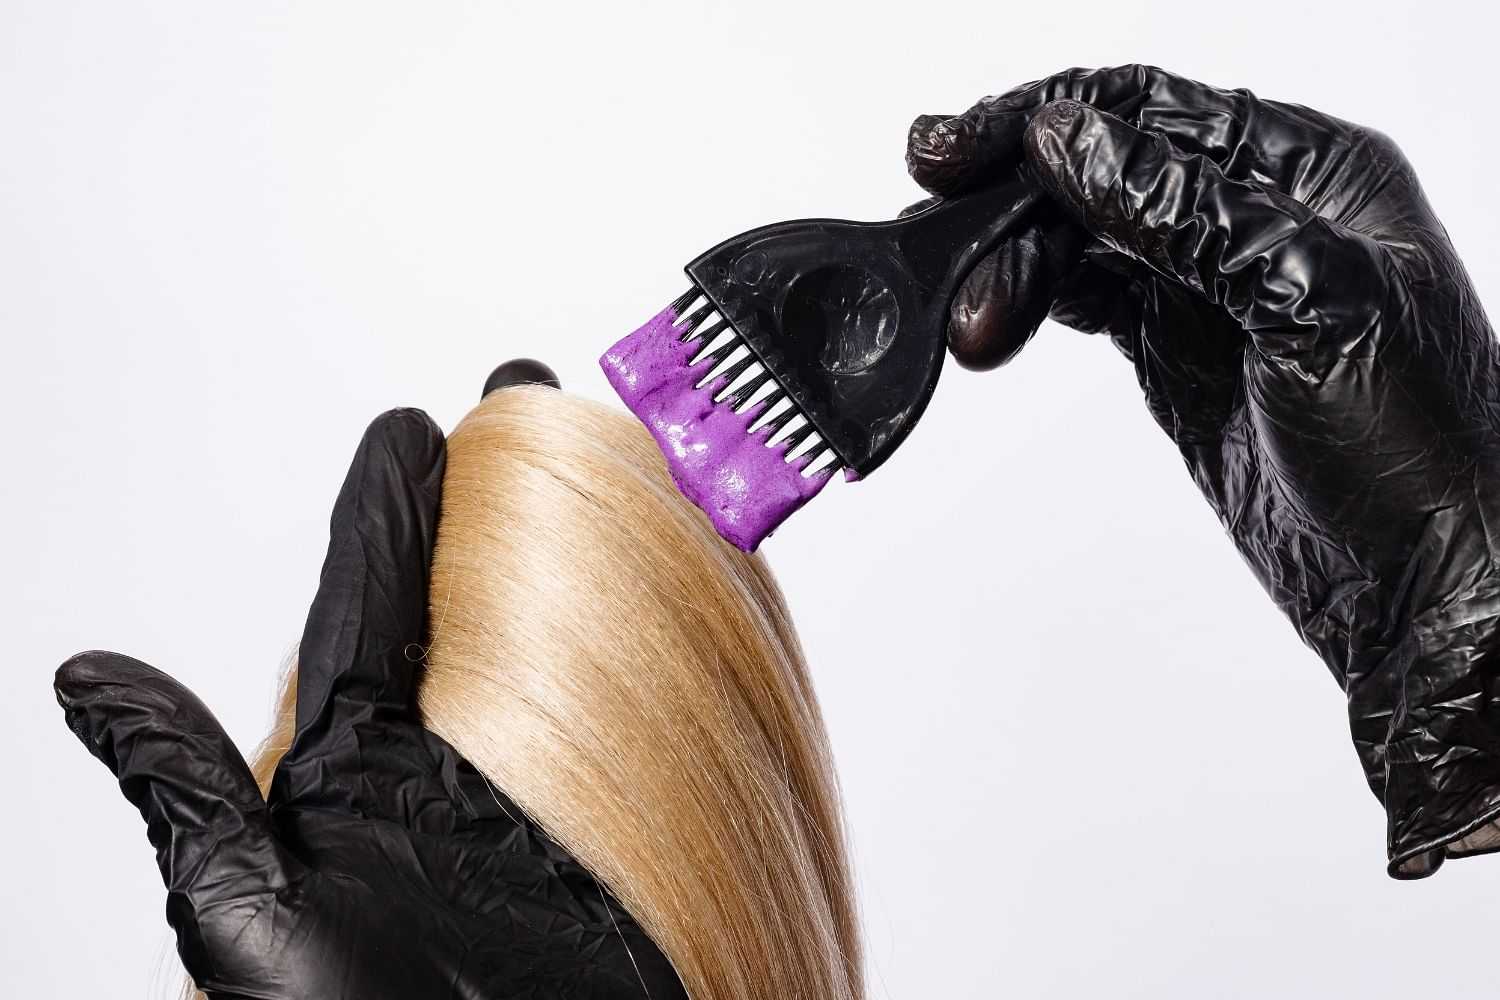 Stylist applying purple dye to blonde hair with a brush.